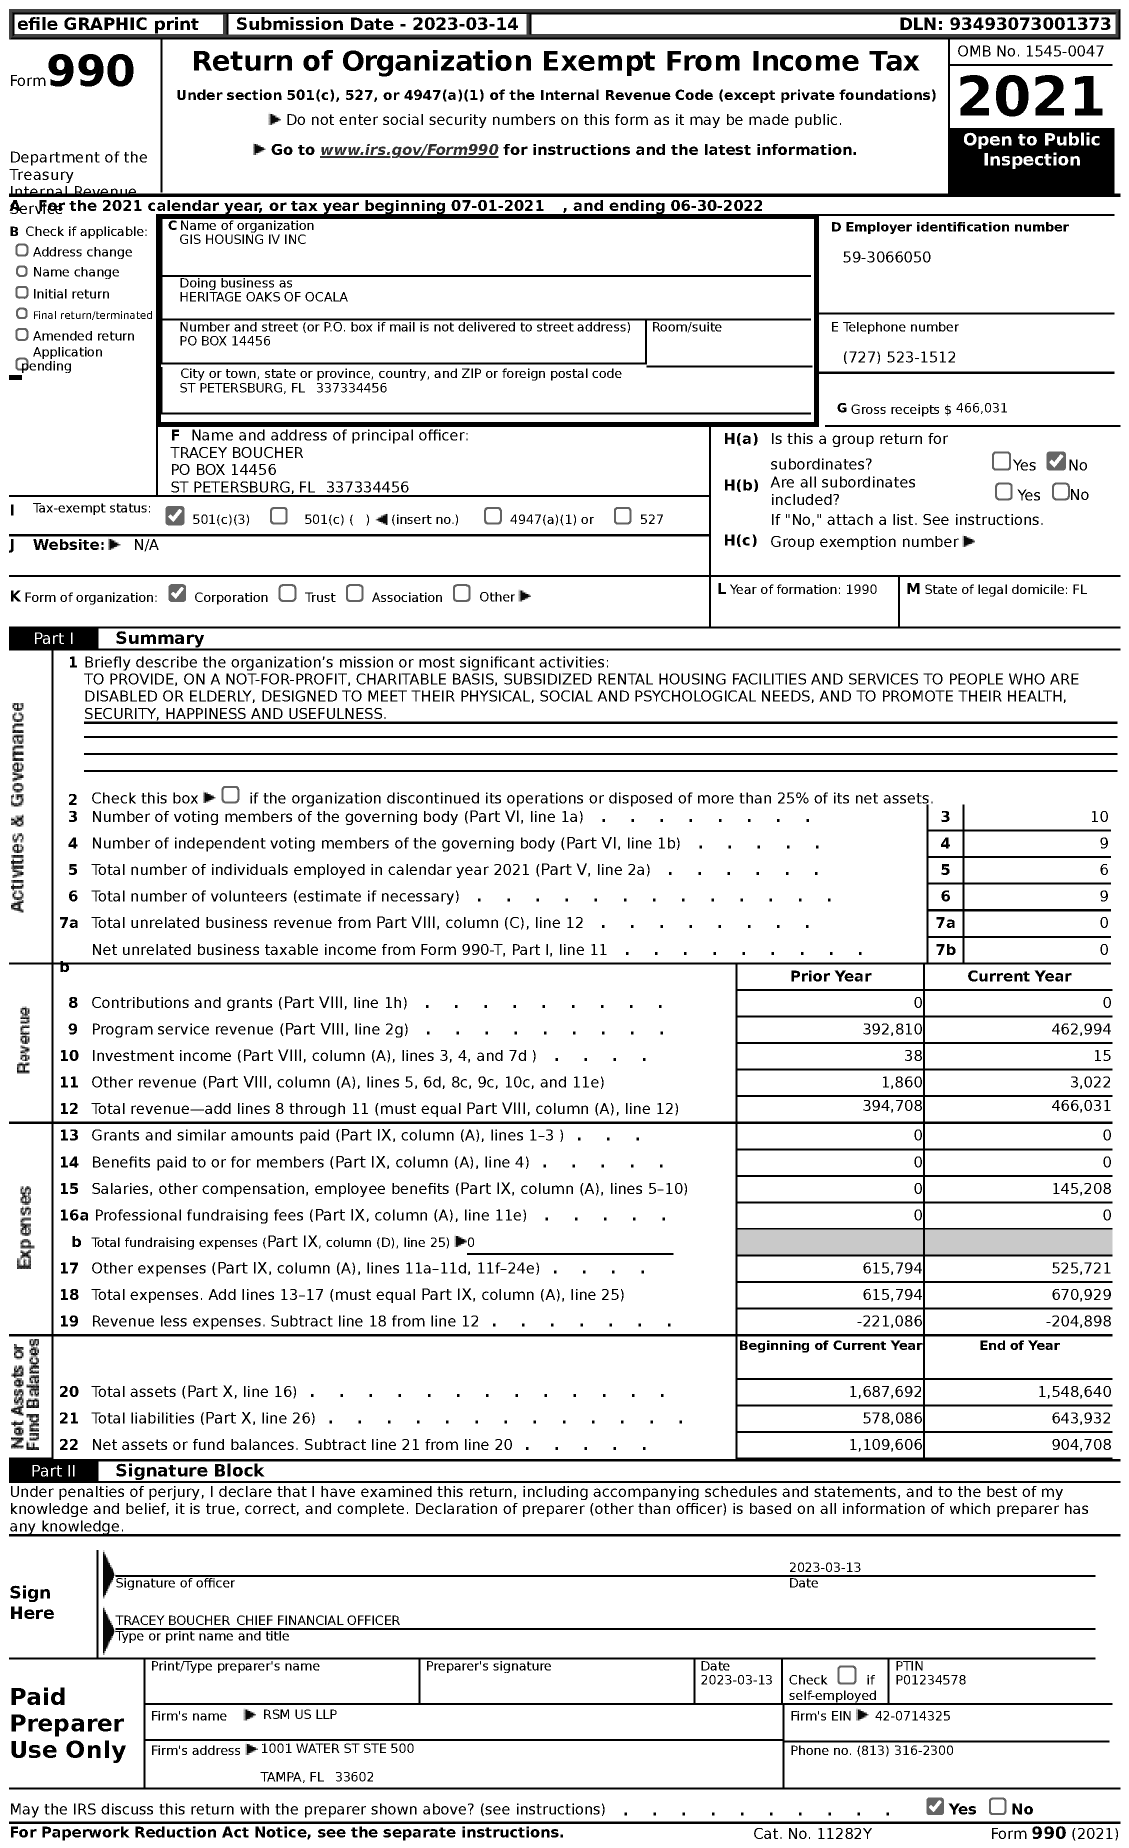 Image of first page of 2021 Form 990 for Heritage Oaks of Ocala